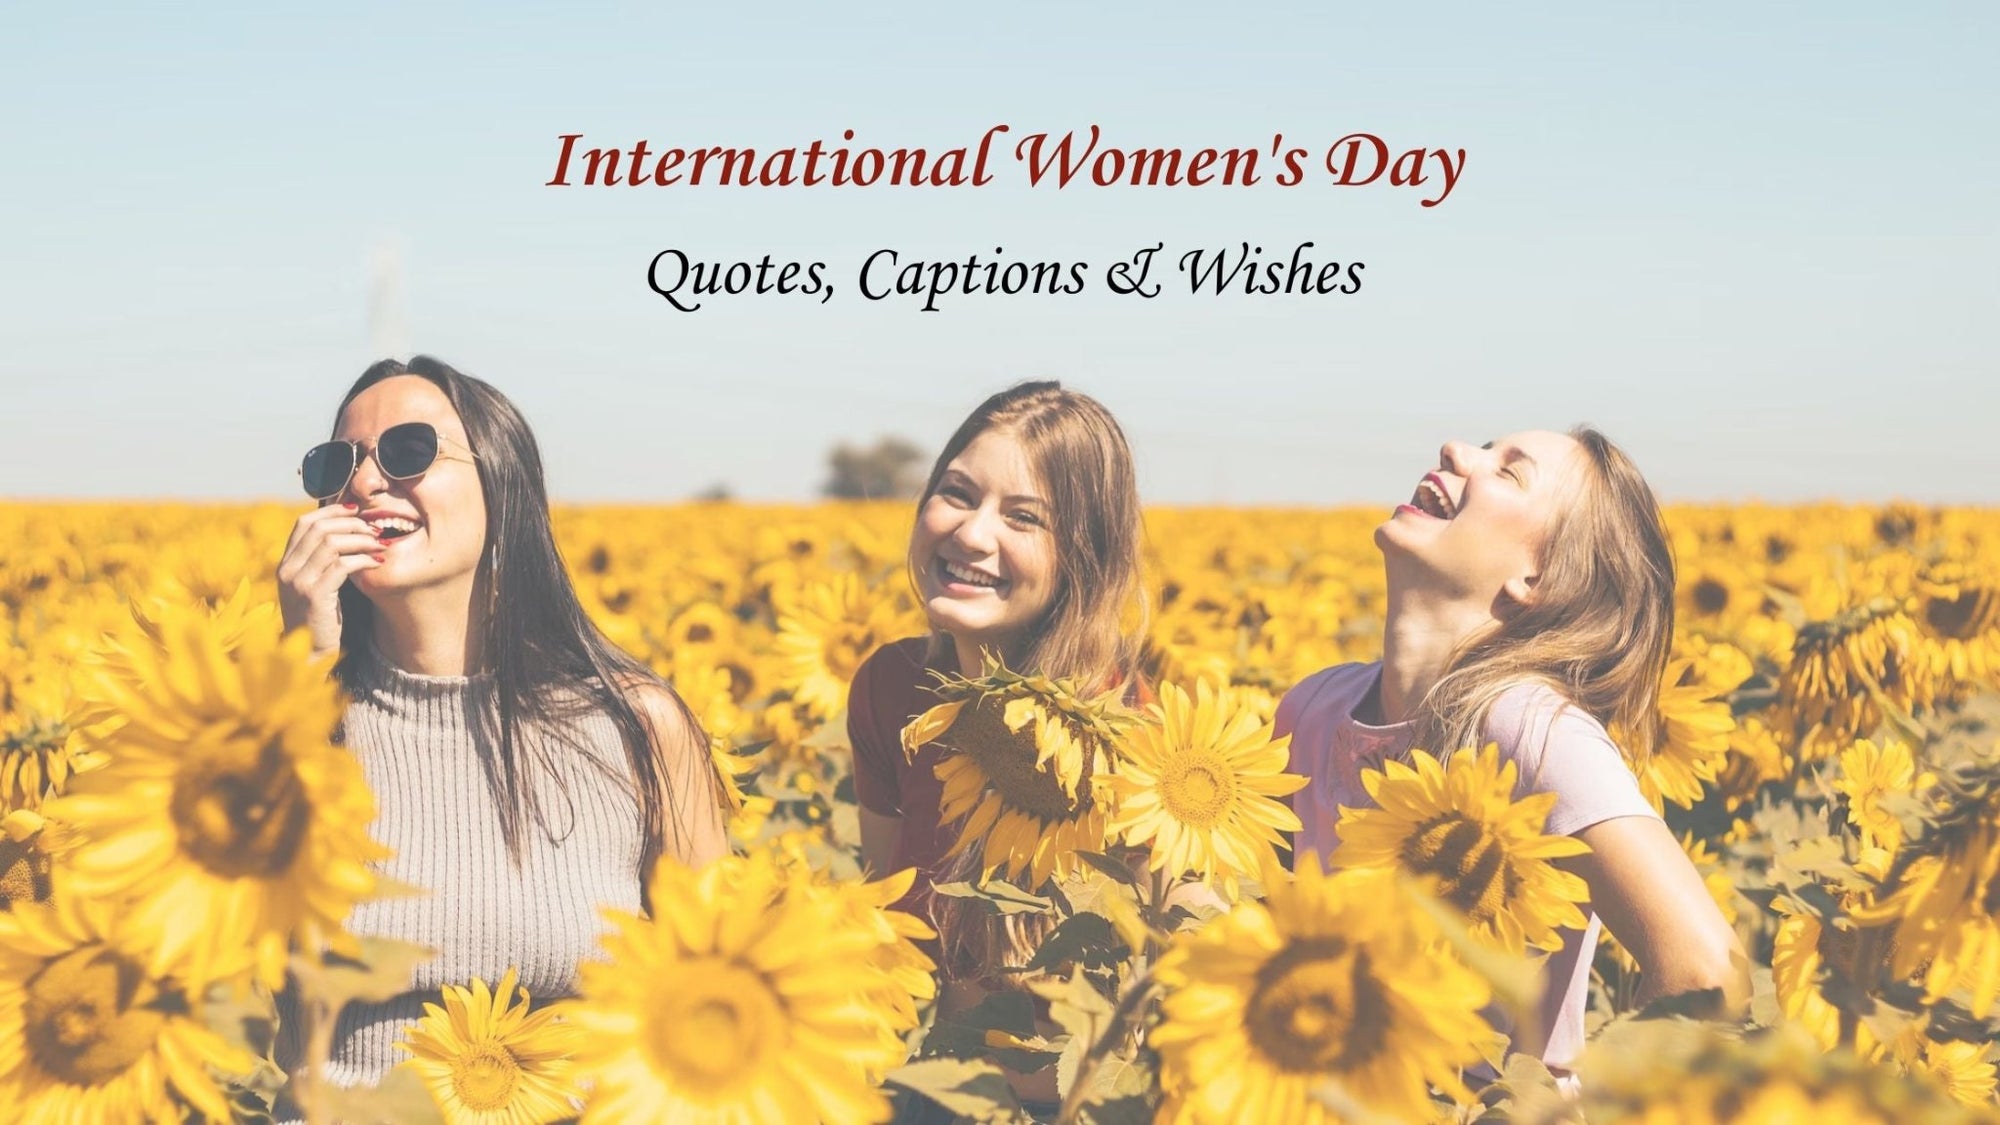 International Women's Day Quotes, Captions & Wishes - Rug & Home